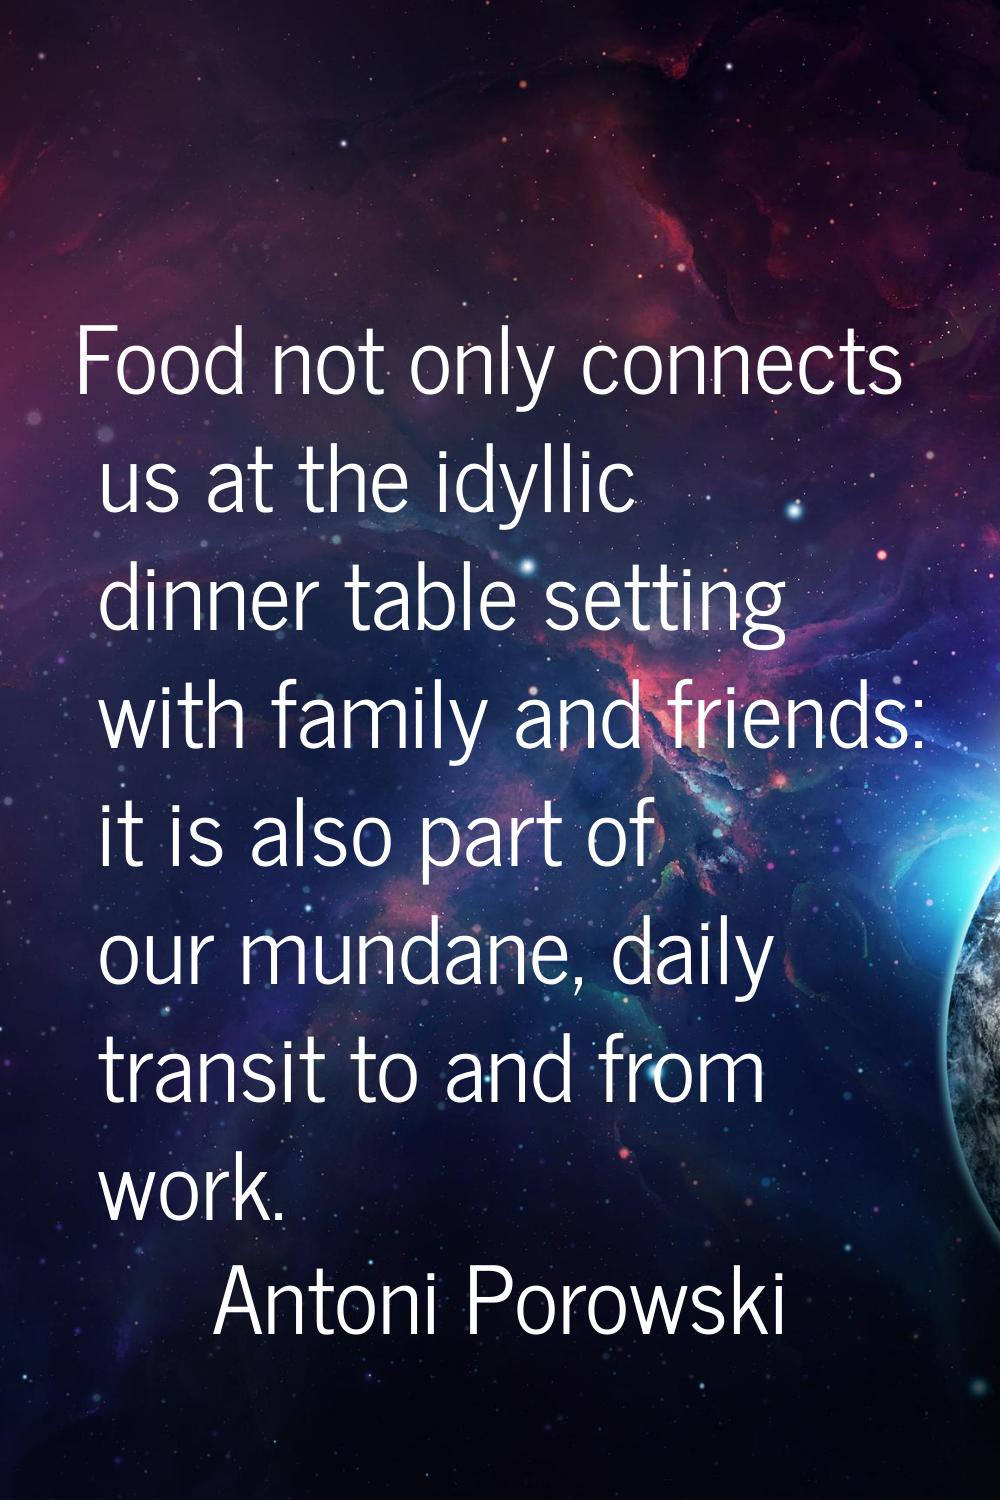 Food not only connects us at the idyllic dinner table setting with family and friends: it is also p